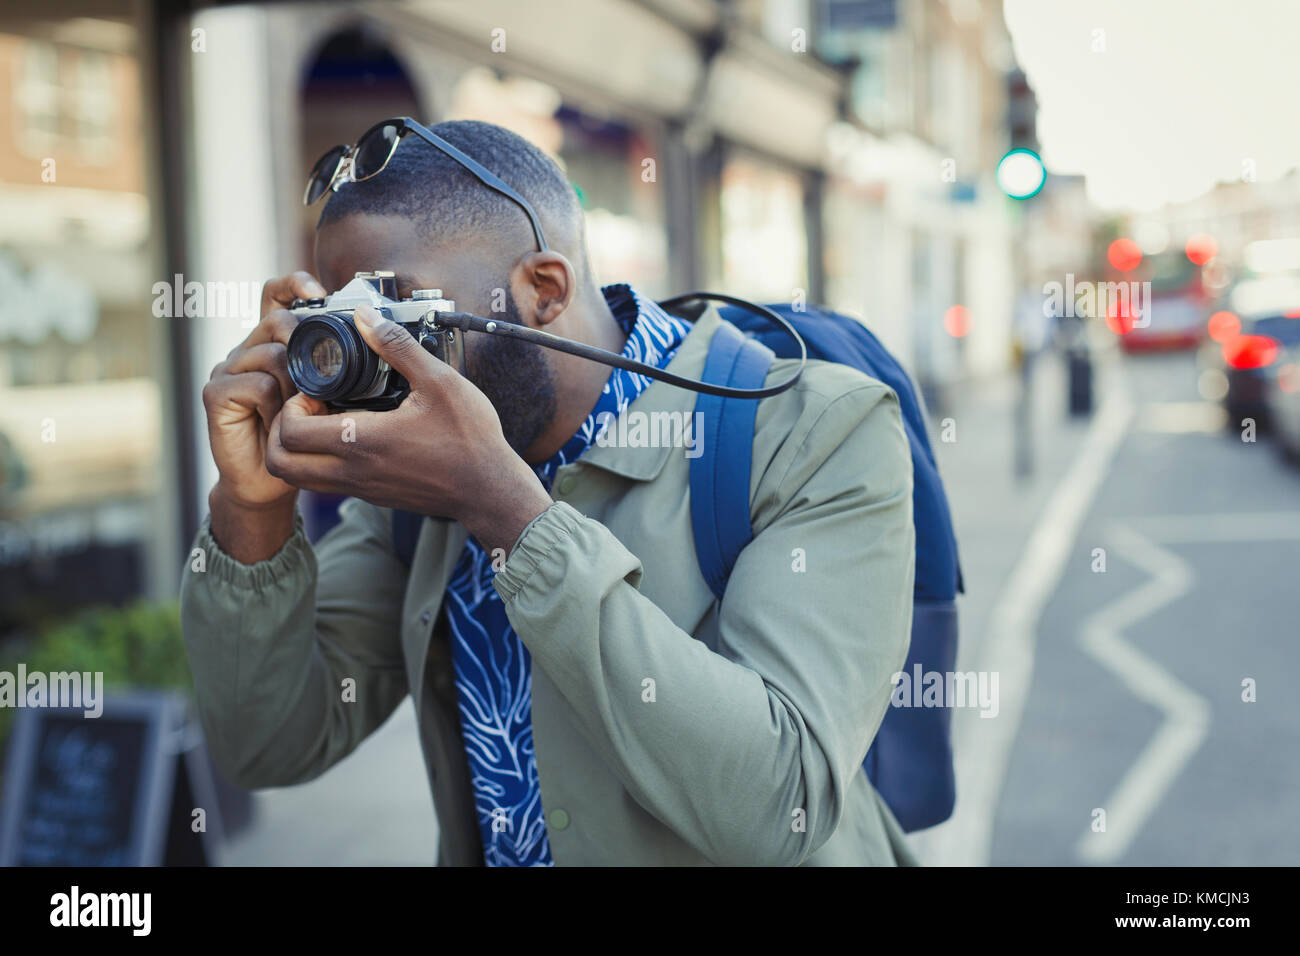 Young male tourist photographing with camera on street Stock Photo